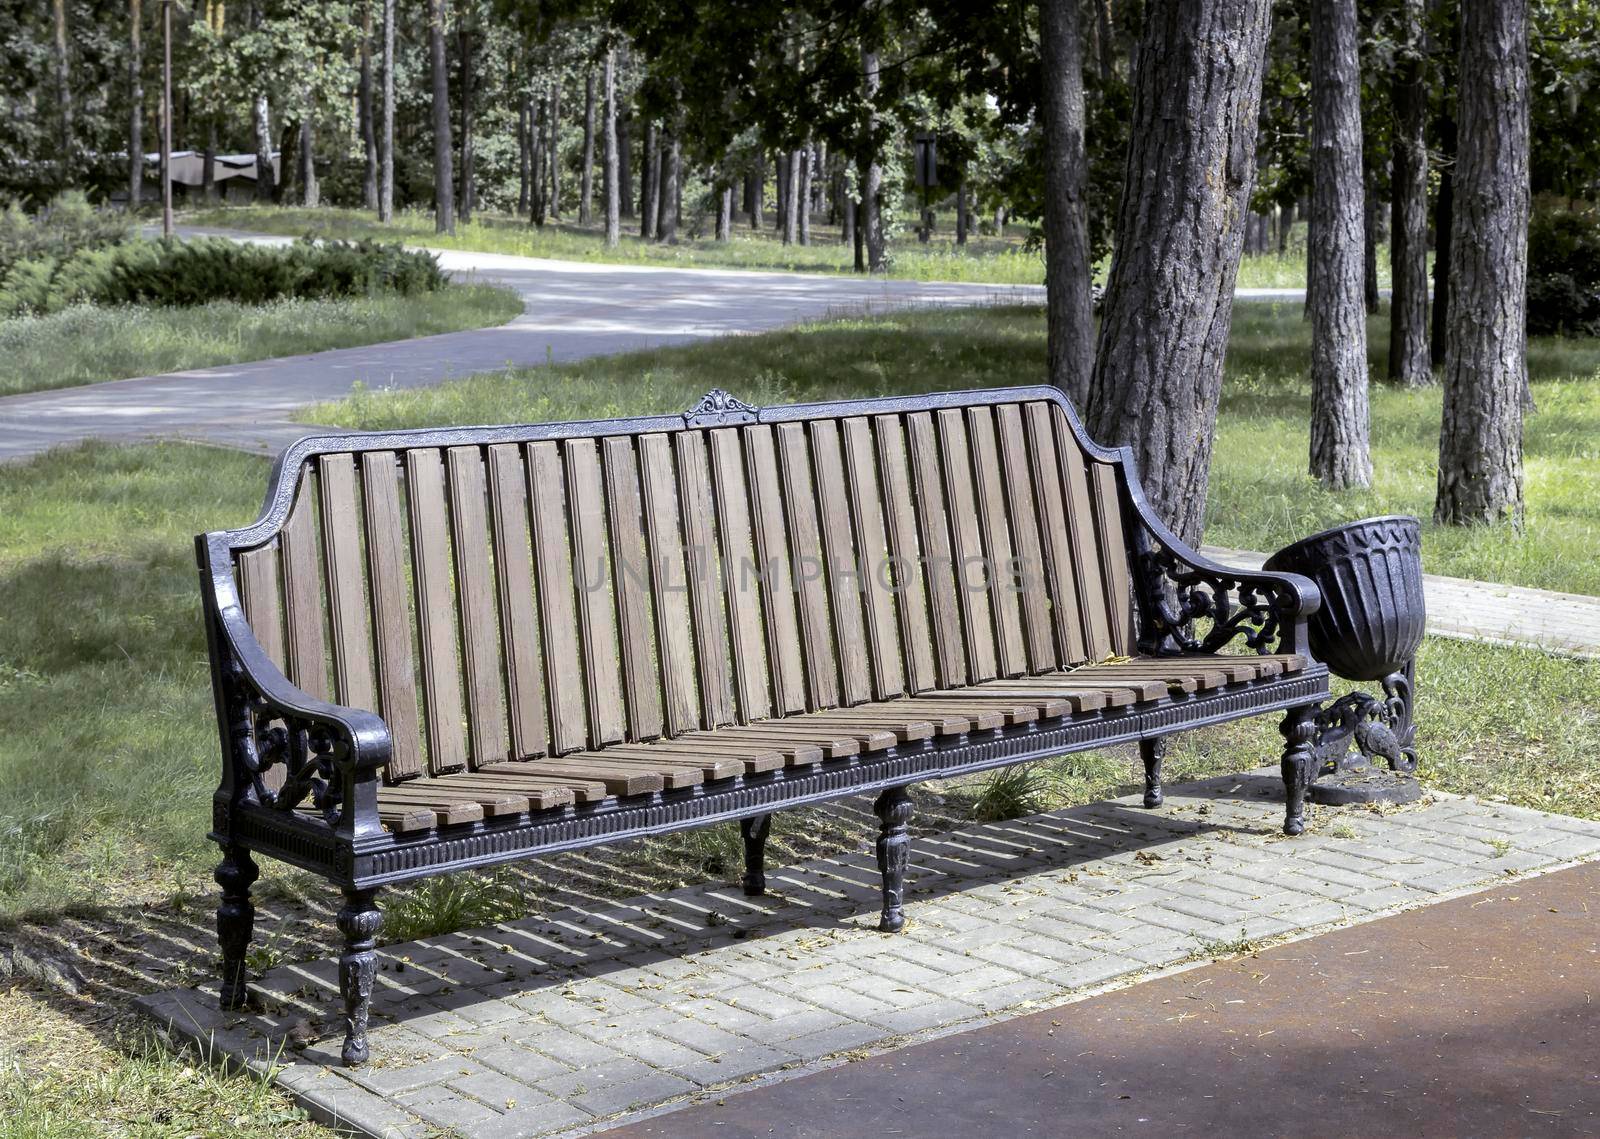 On the alley of the park there is a comfortable wooden bench for relaxing. Front view, close-up.